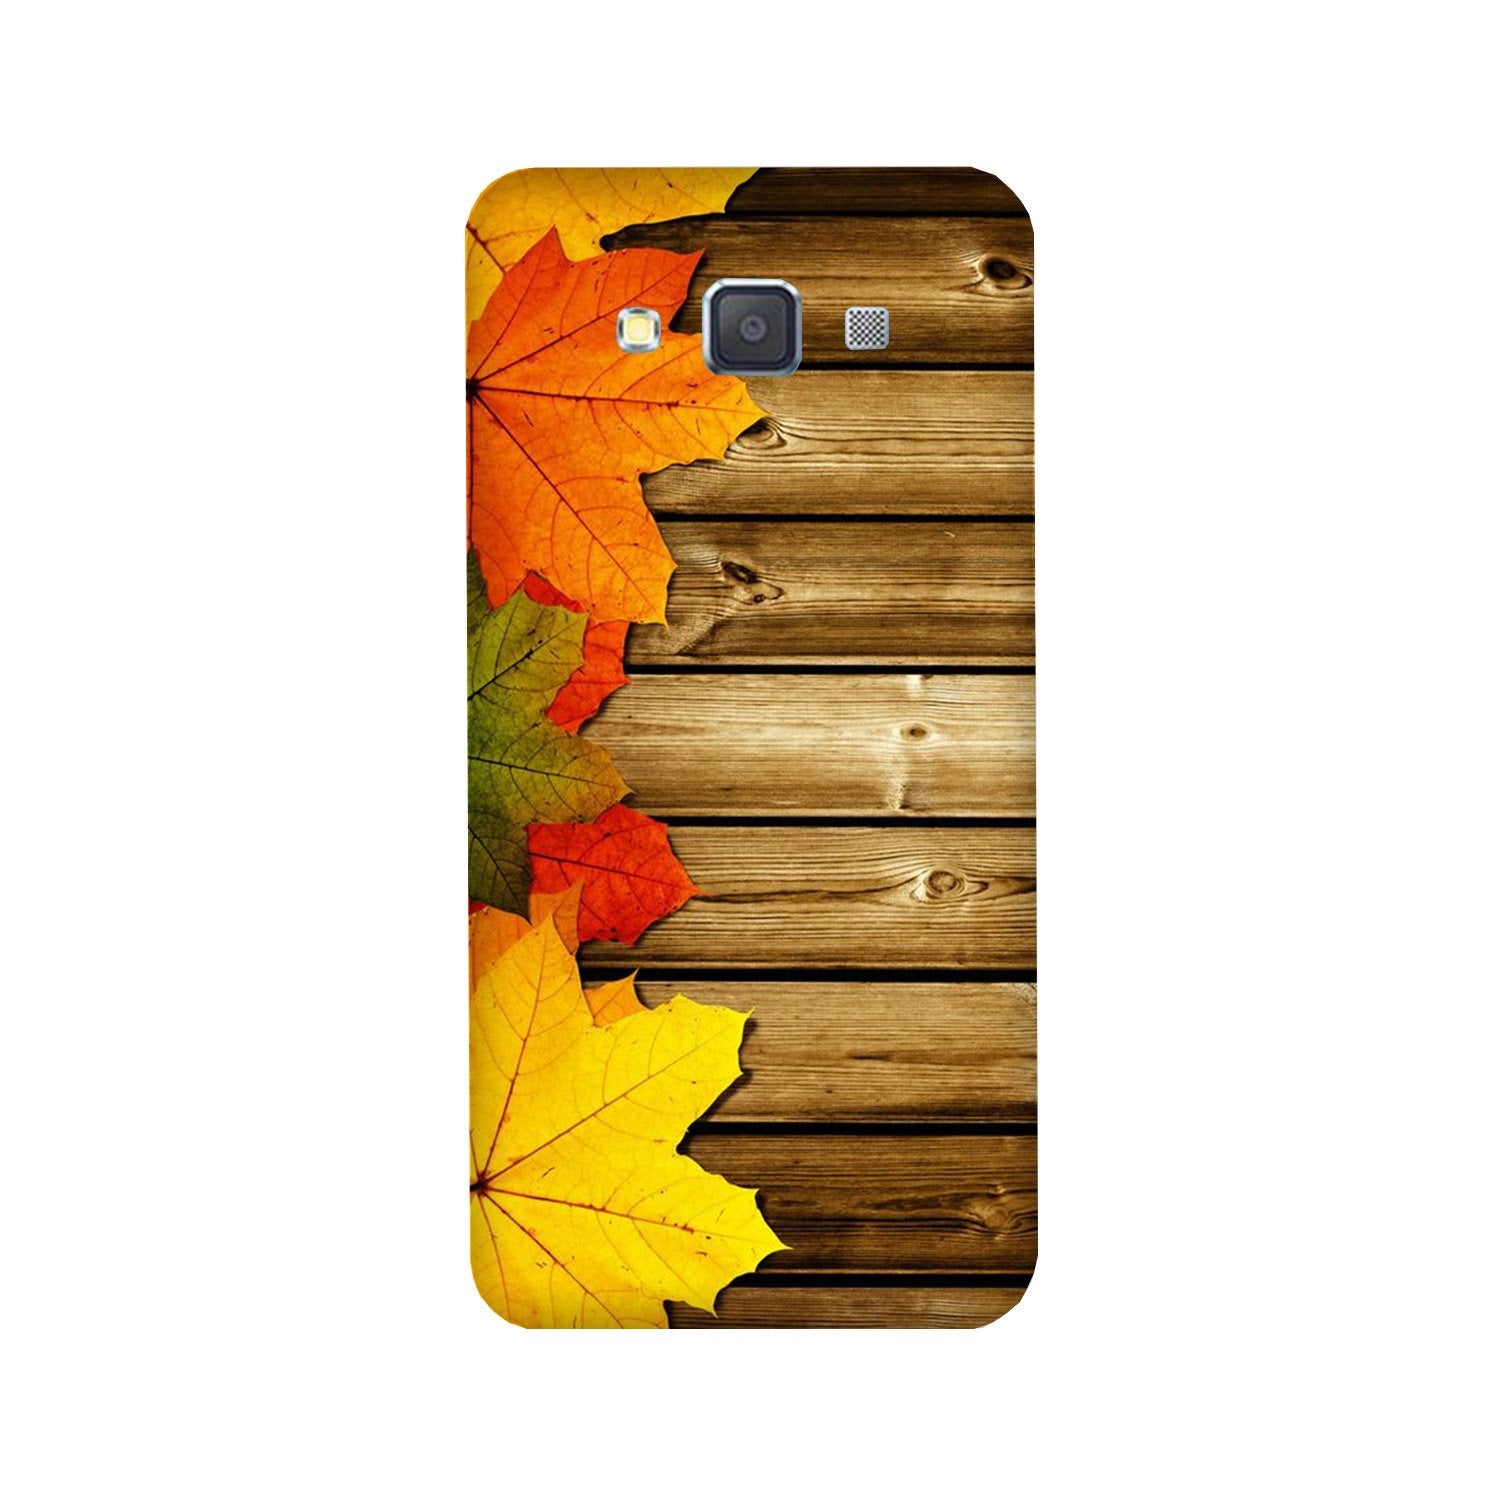 Wooden look3 Case for Galaxy A3 (2015)